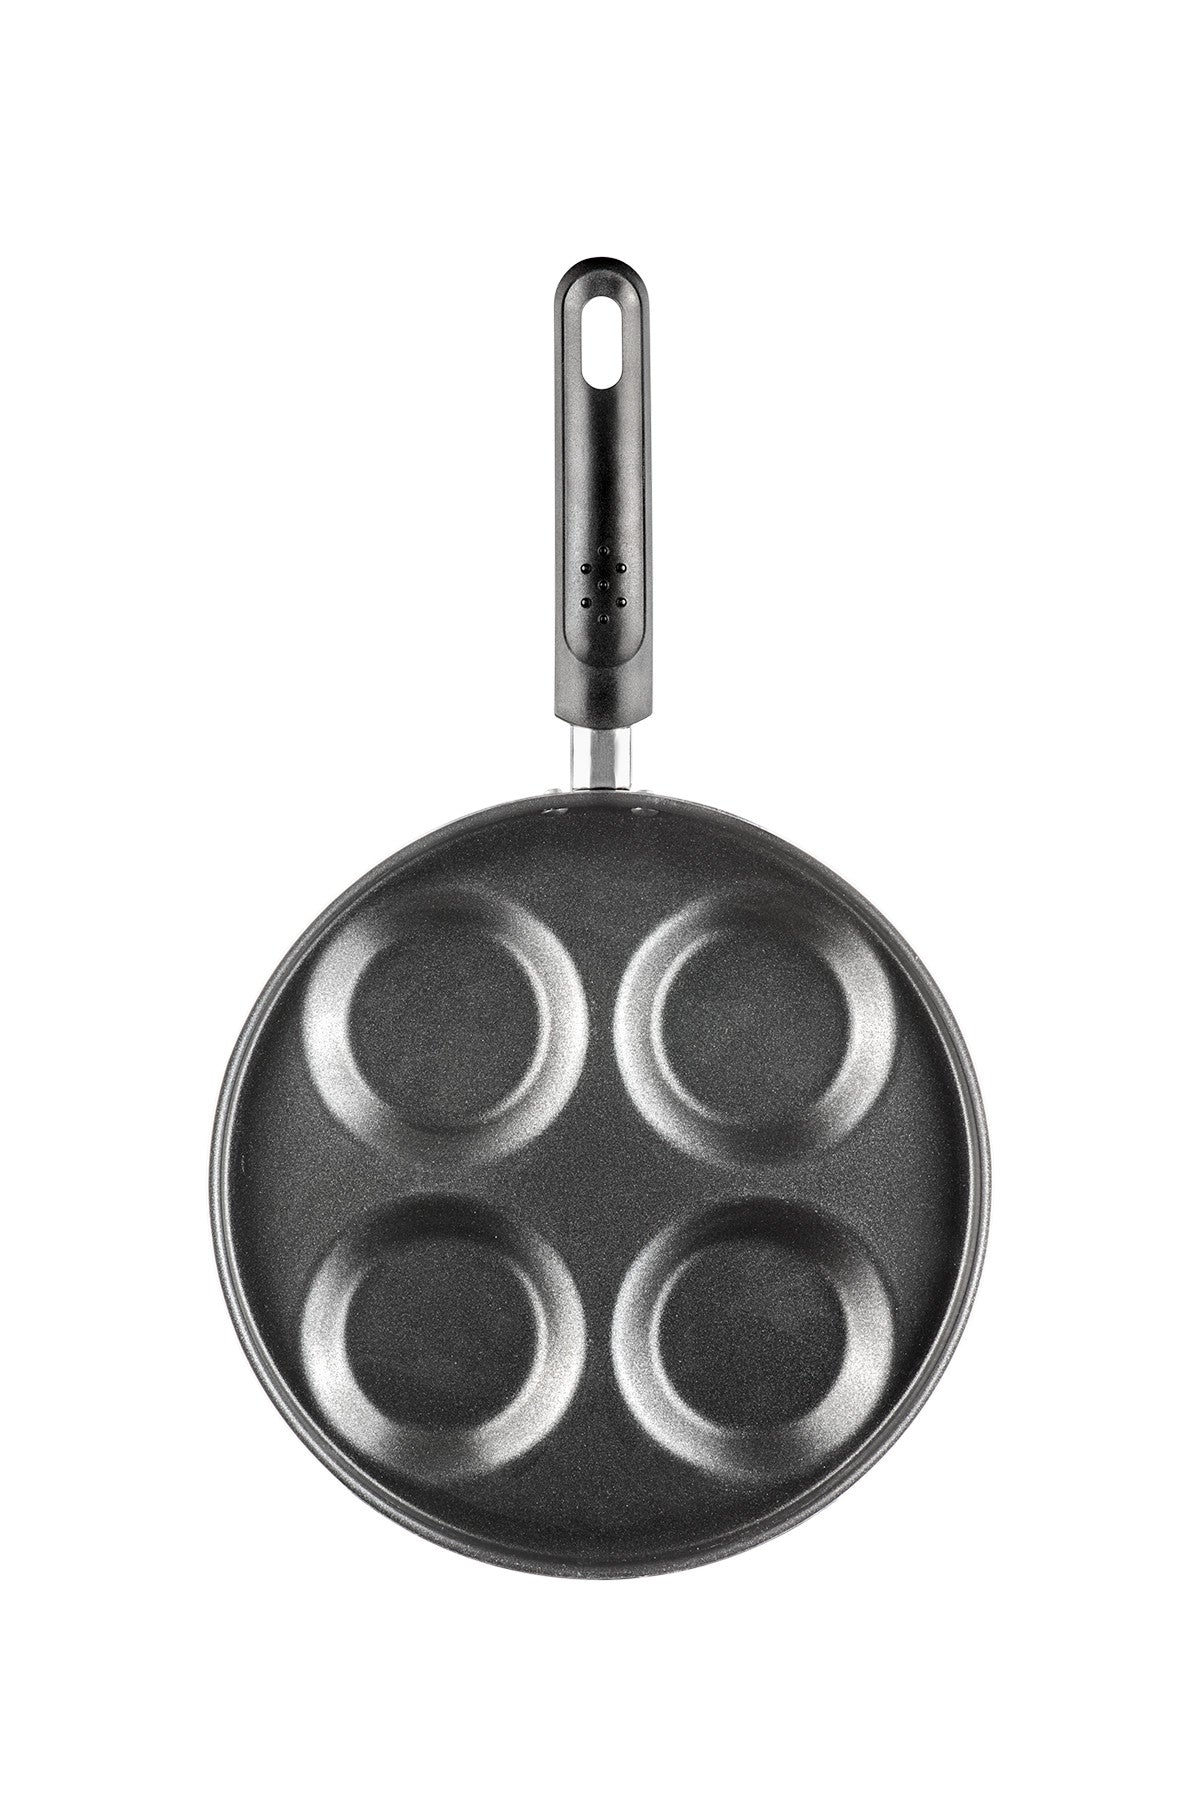 PANCAKE-/BLINI PAN WITH 4 CUPS (NOT SUITABLE FOR INDUCTION!)